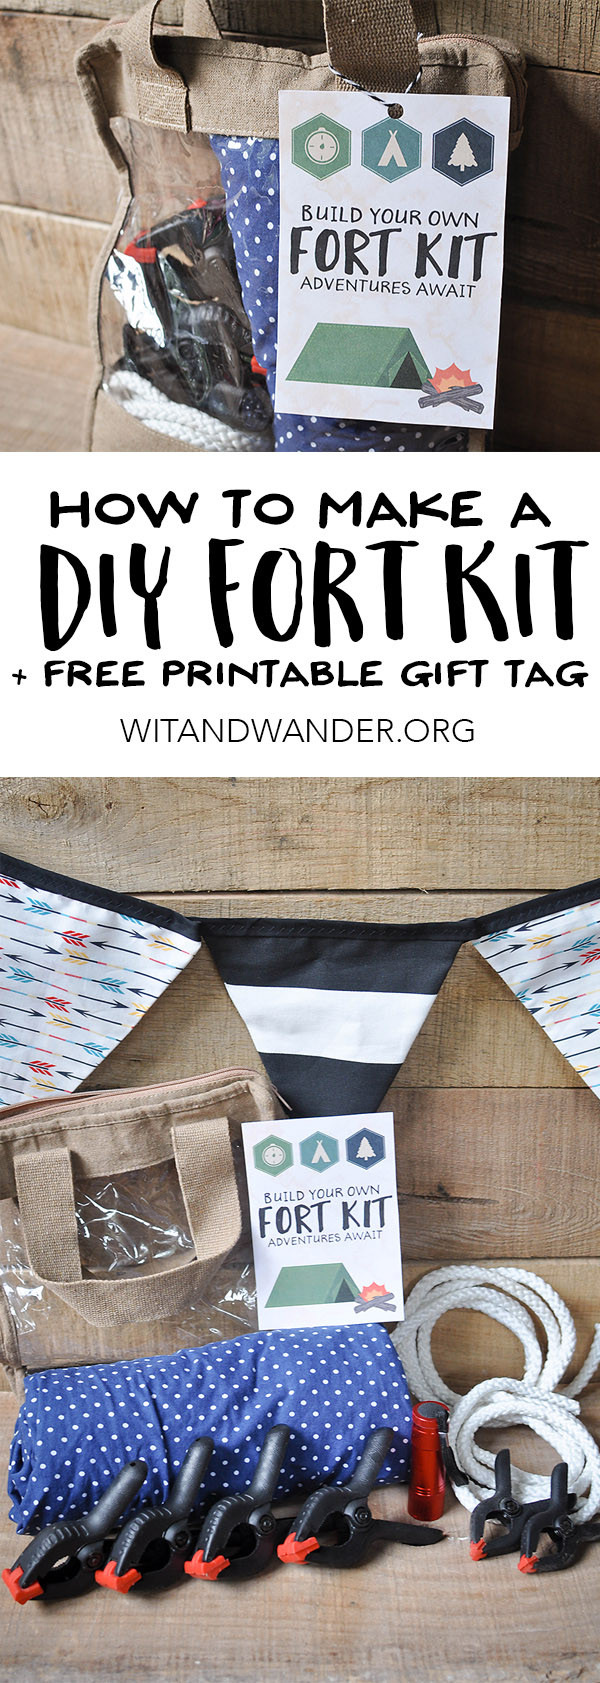 Fort Kit DIY
 DIY Fort Kit with a Free Printable Gift Tag Our